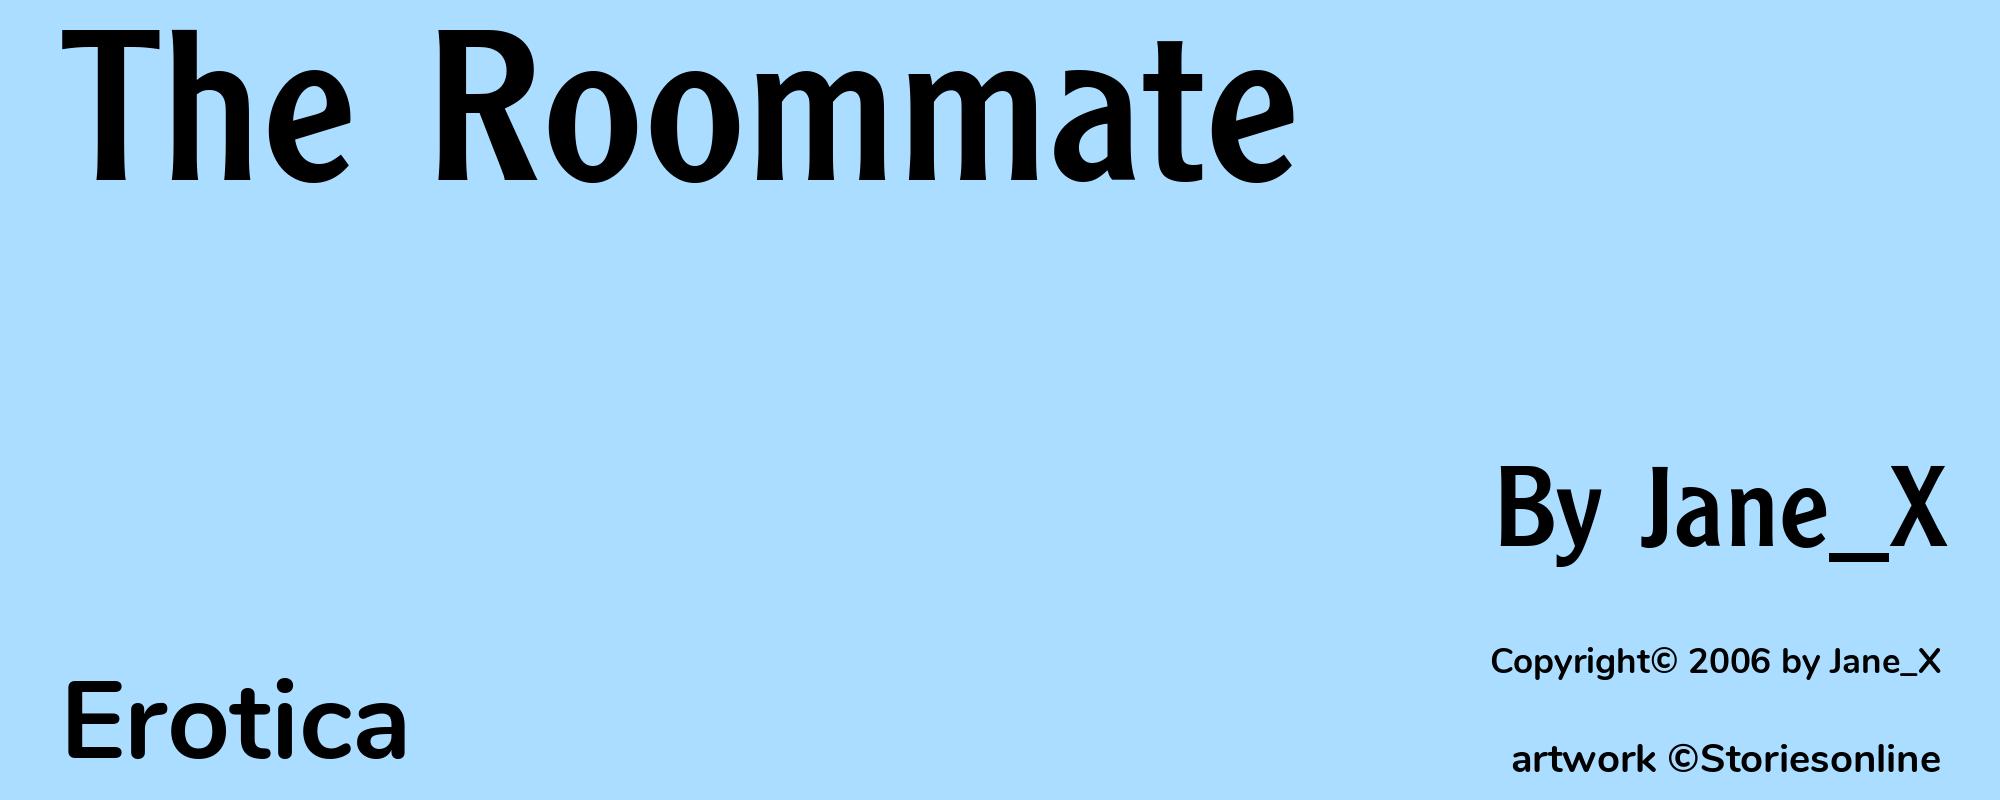 The Roommate - Cover